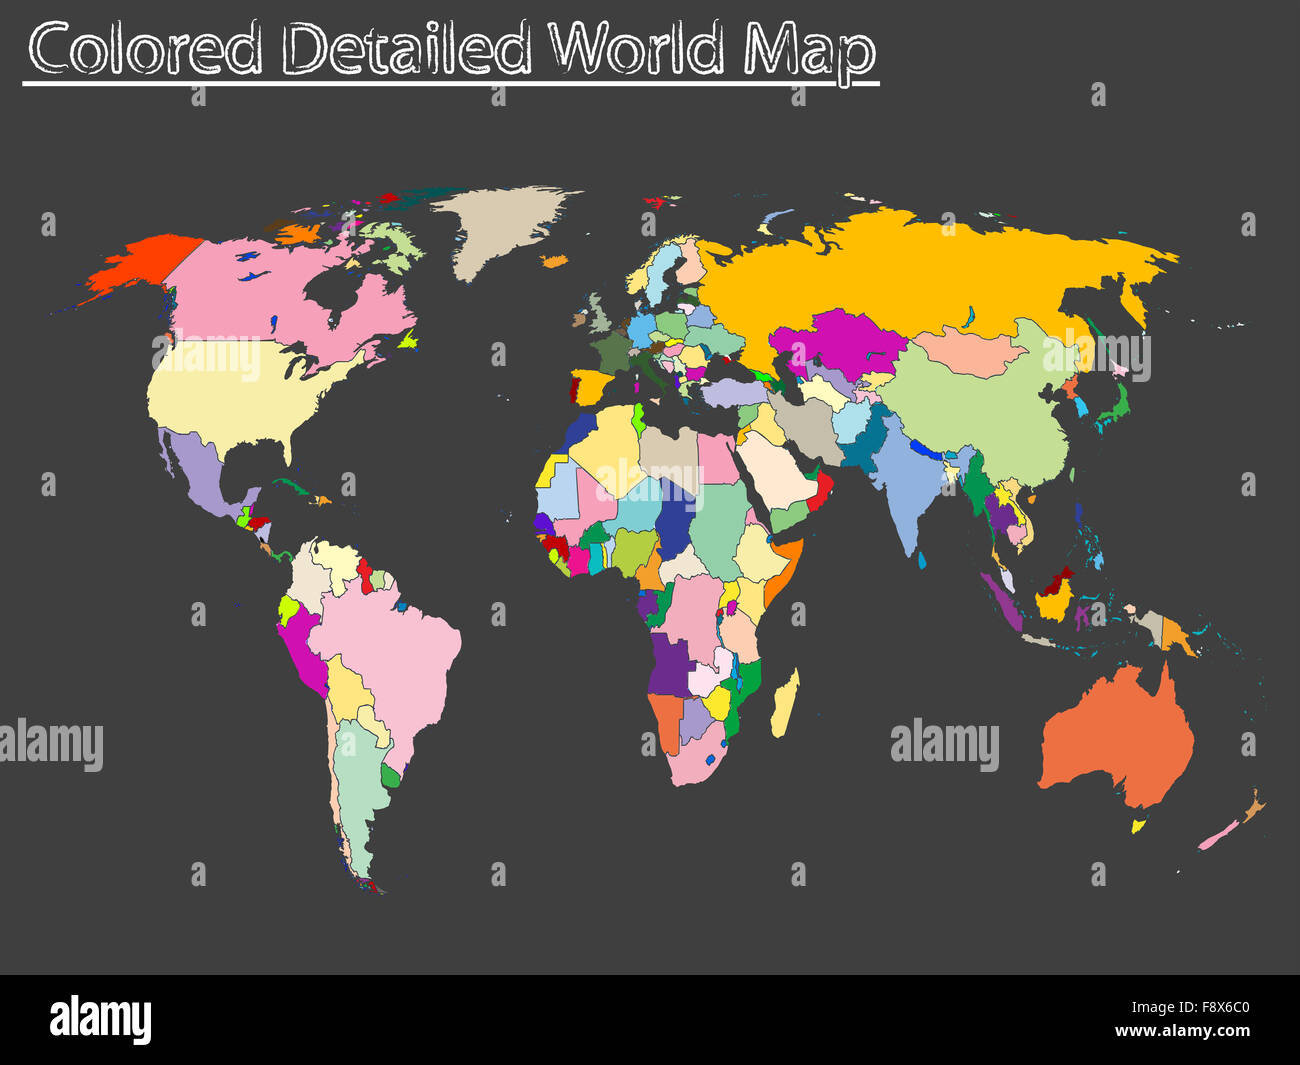 colored detailed world map Stock Photo